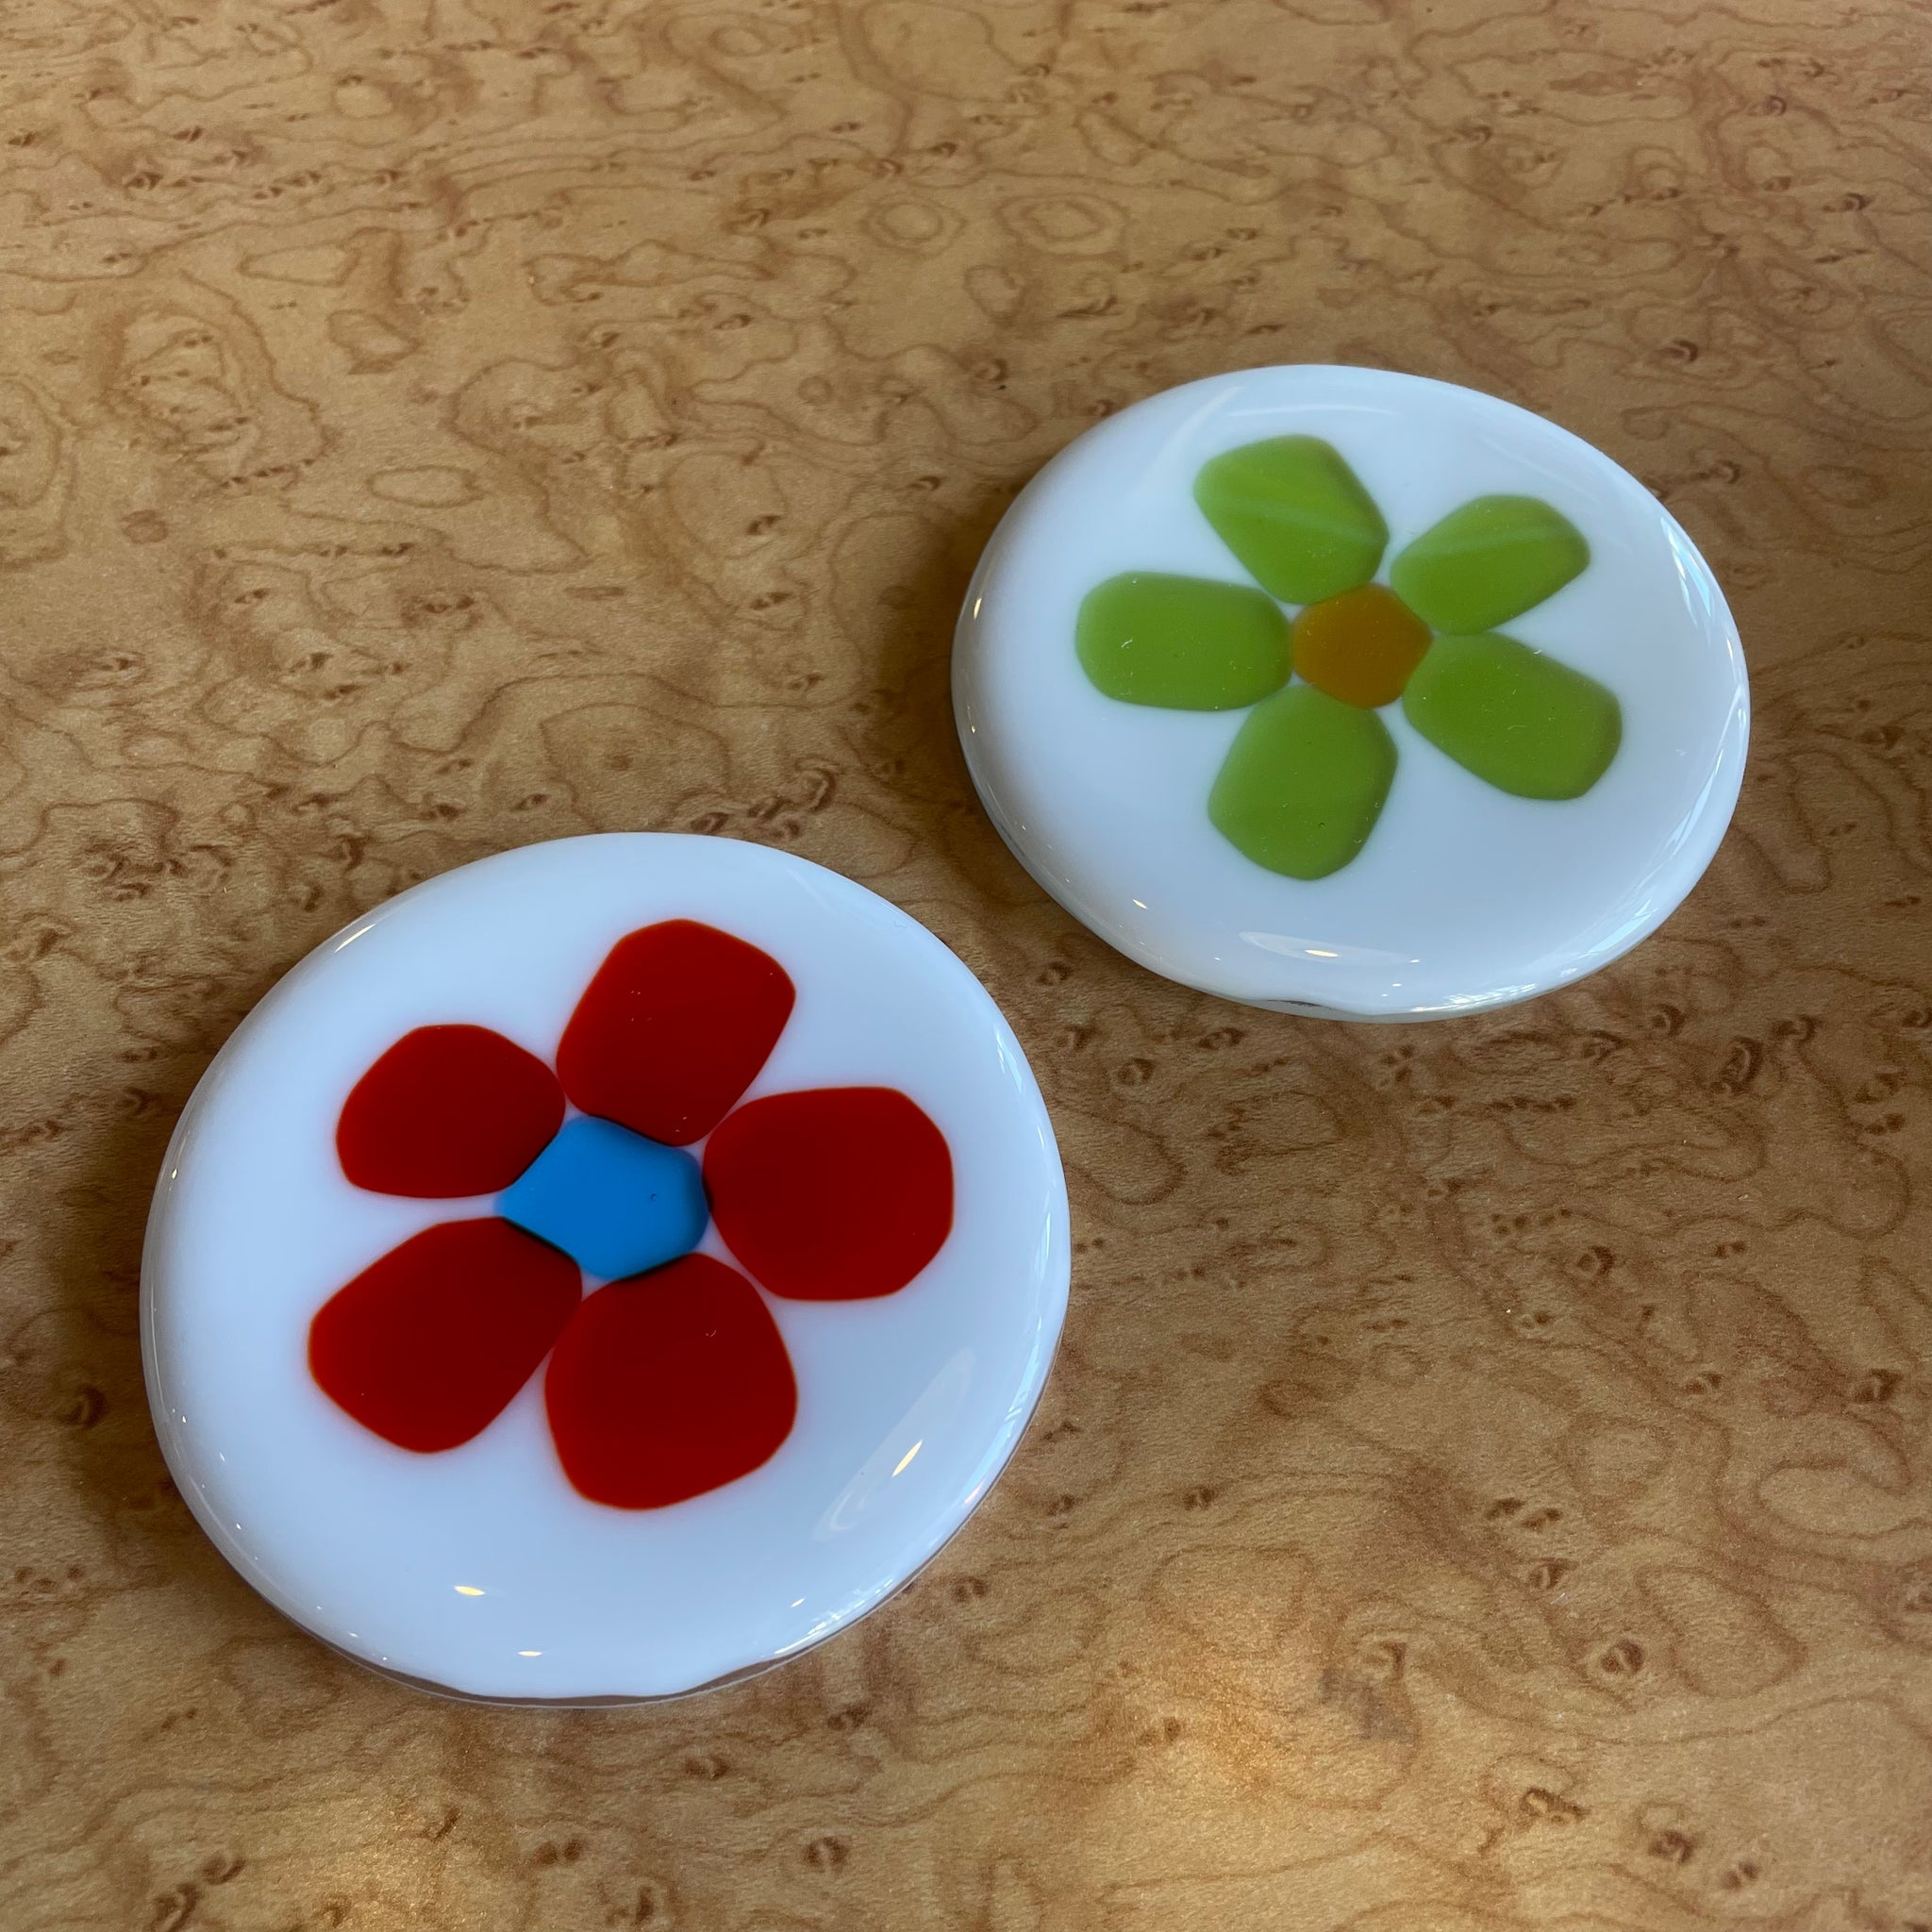 Dot Glass Flower Coasters kitchen > Coasters > best housewarming gifts > good > housewarming gifts > house warming > housewarming gift ideas > housewarming gifts for couples > new home gift ideas > new home gifts > sustainable gifts Dot White  